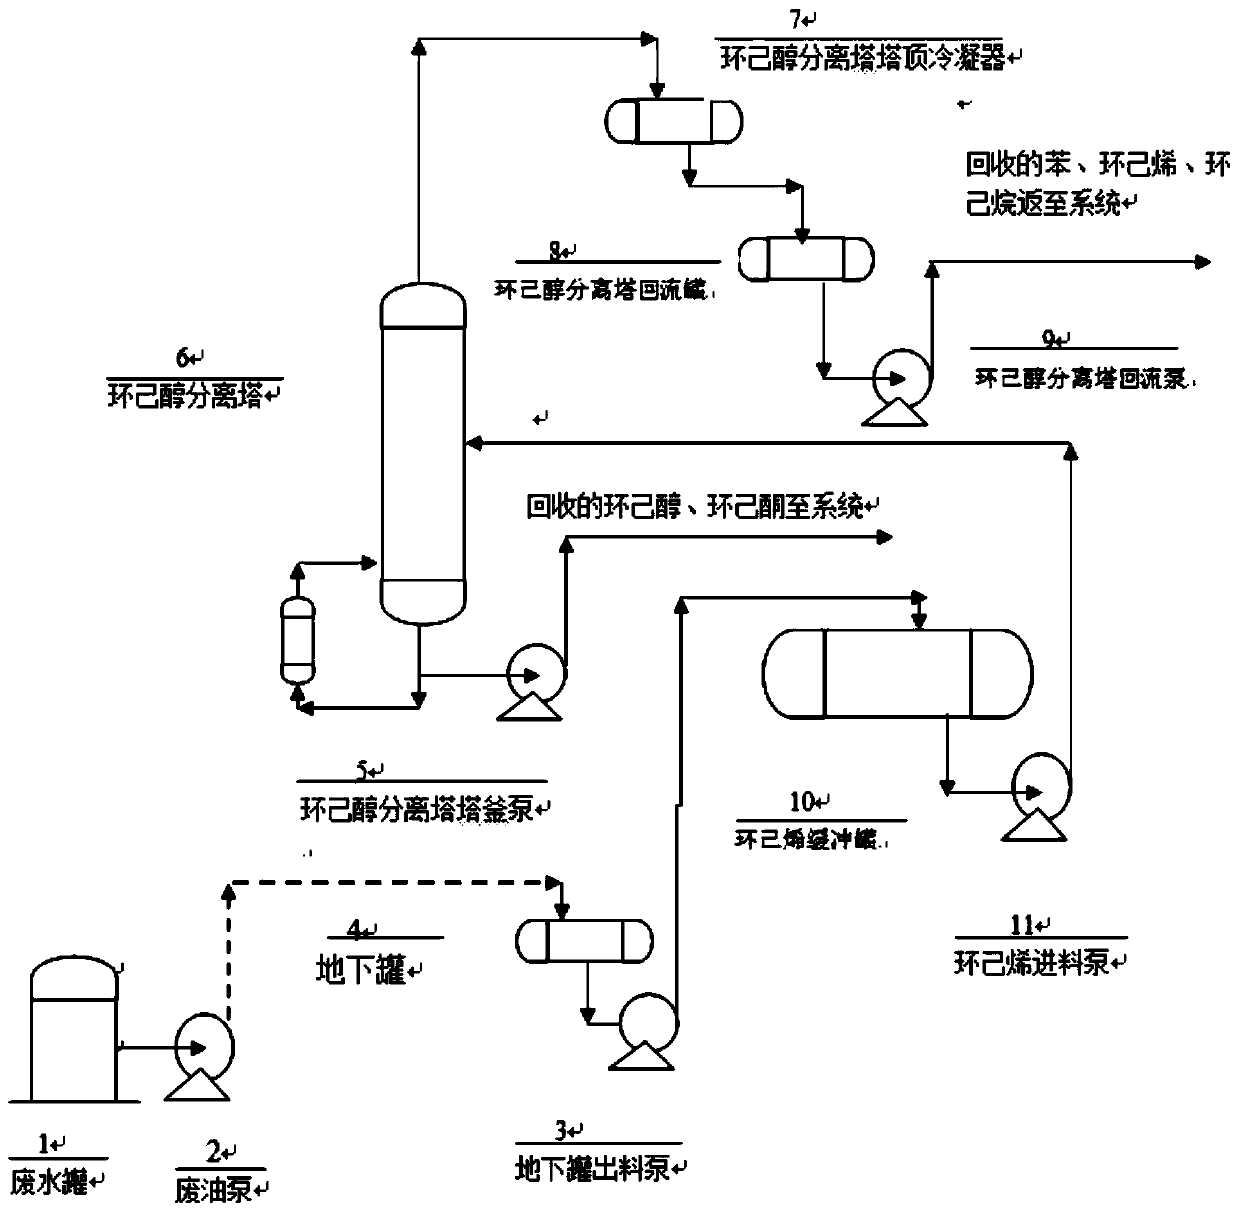 Fuel oil recovery process